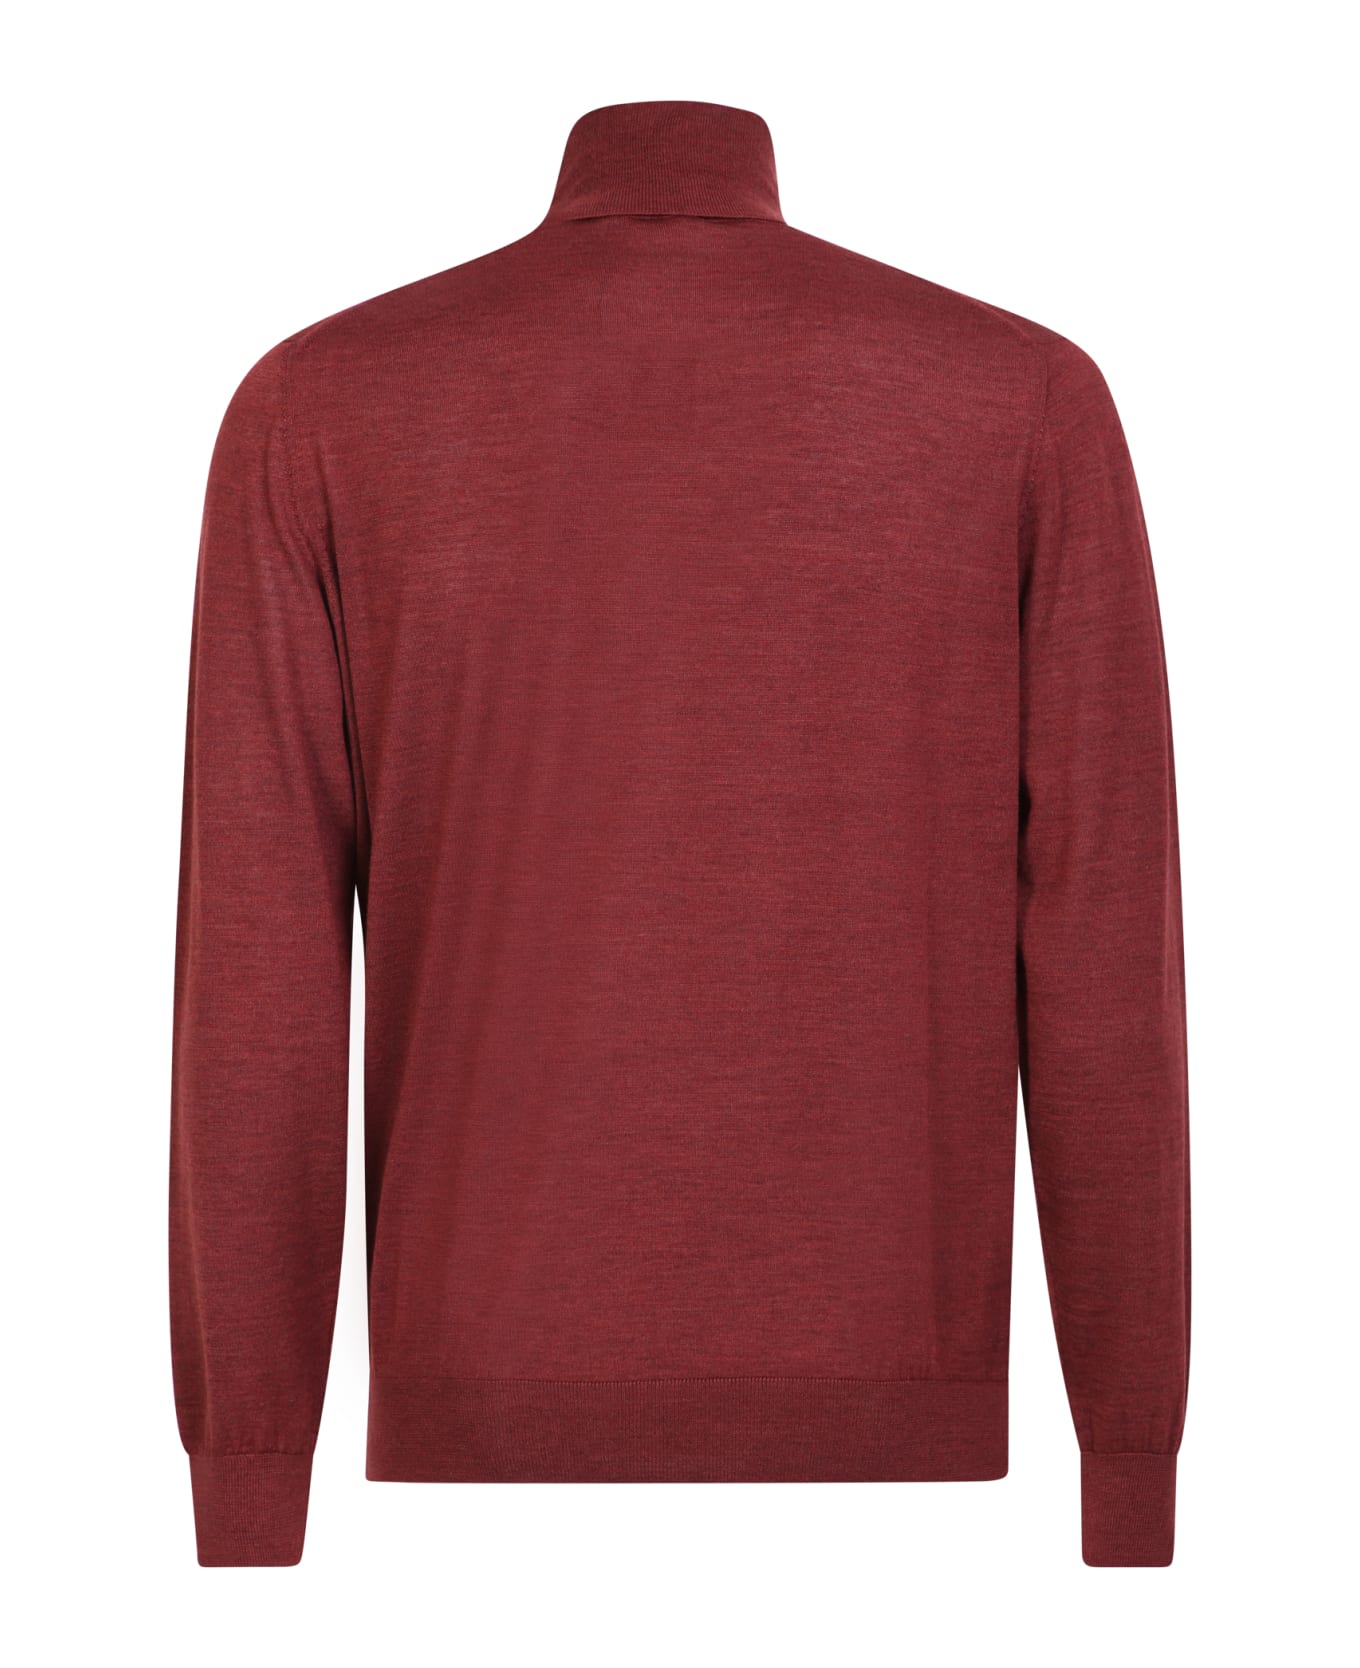 Colombo Silk And Cashmere Sweater - Bordeaux ニットウェア